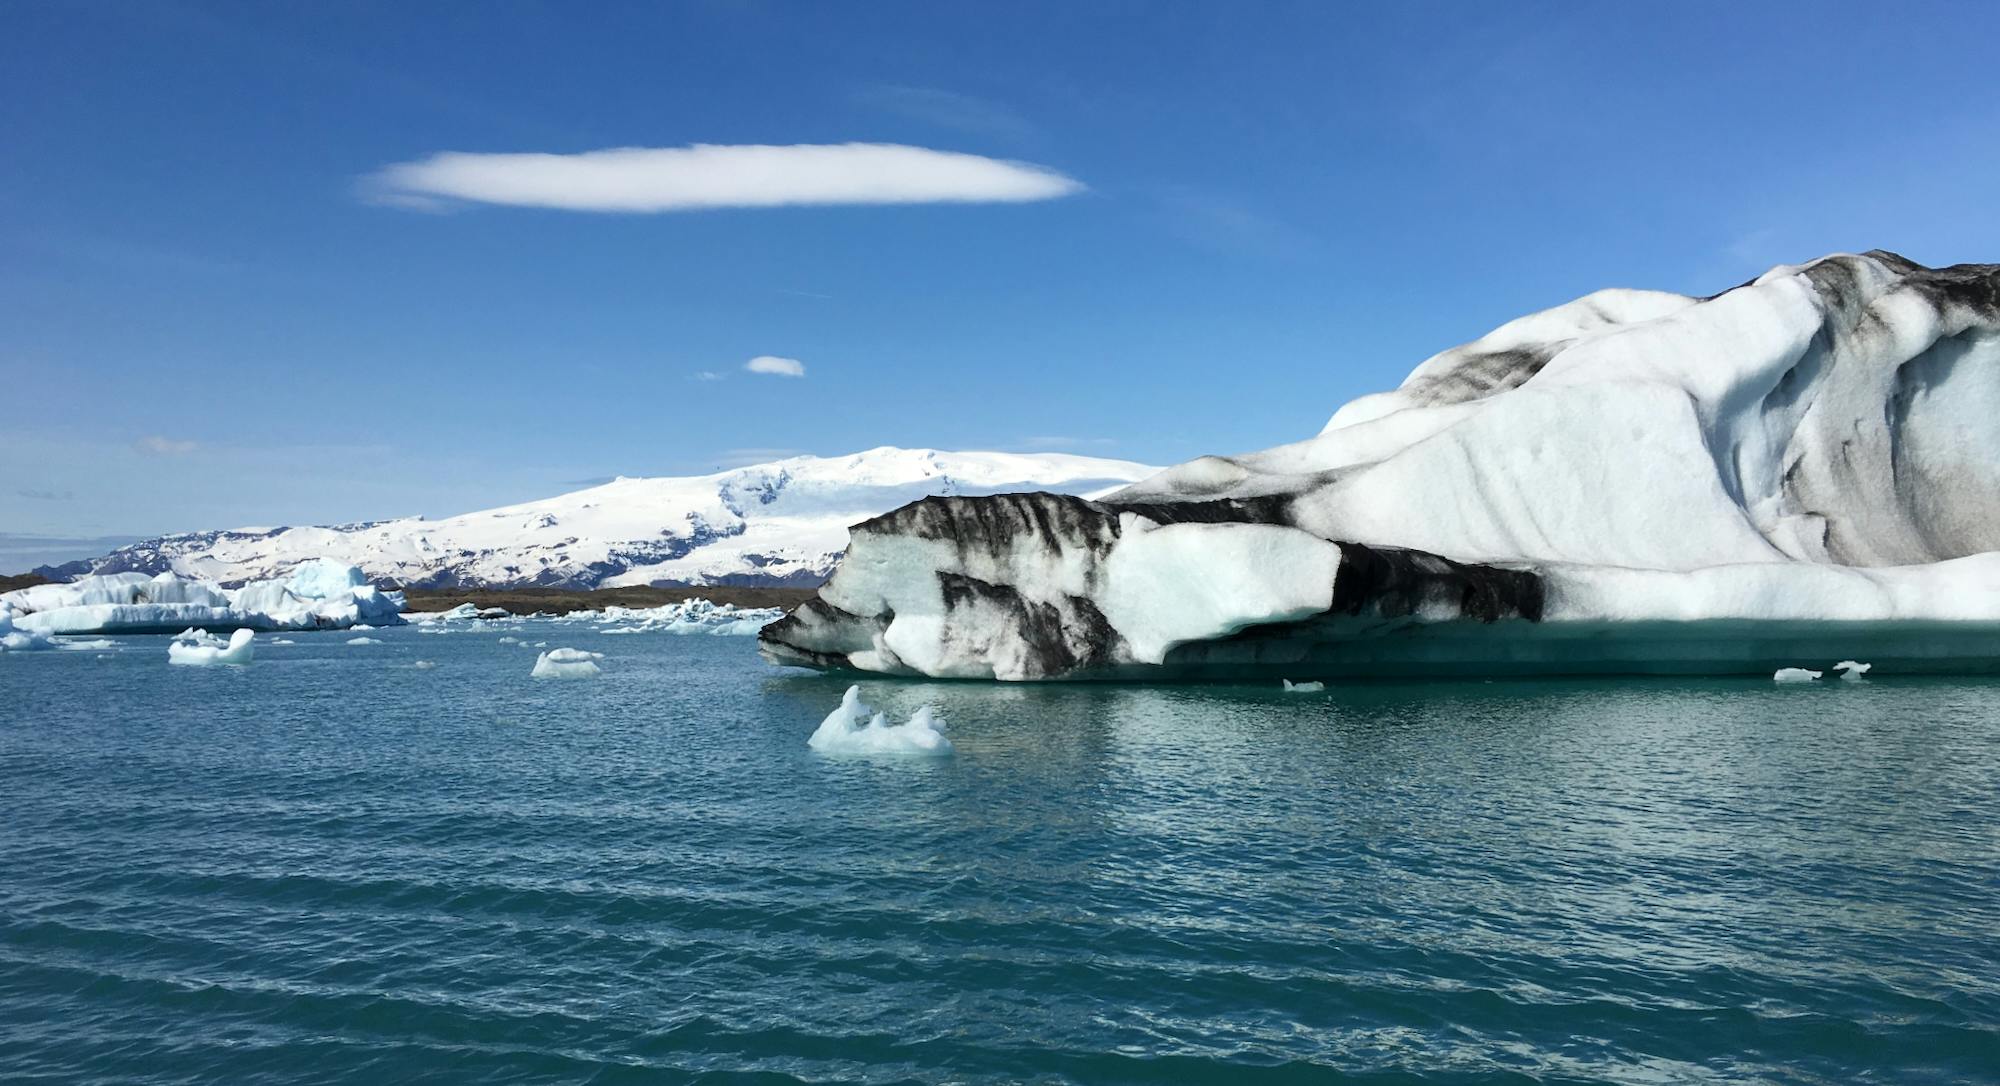 Icebergs with black stripes on a lake